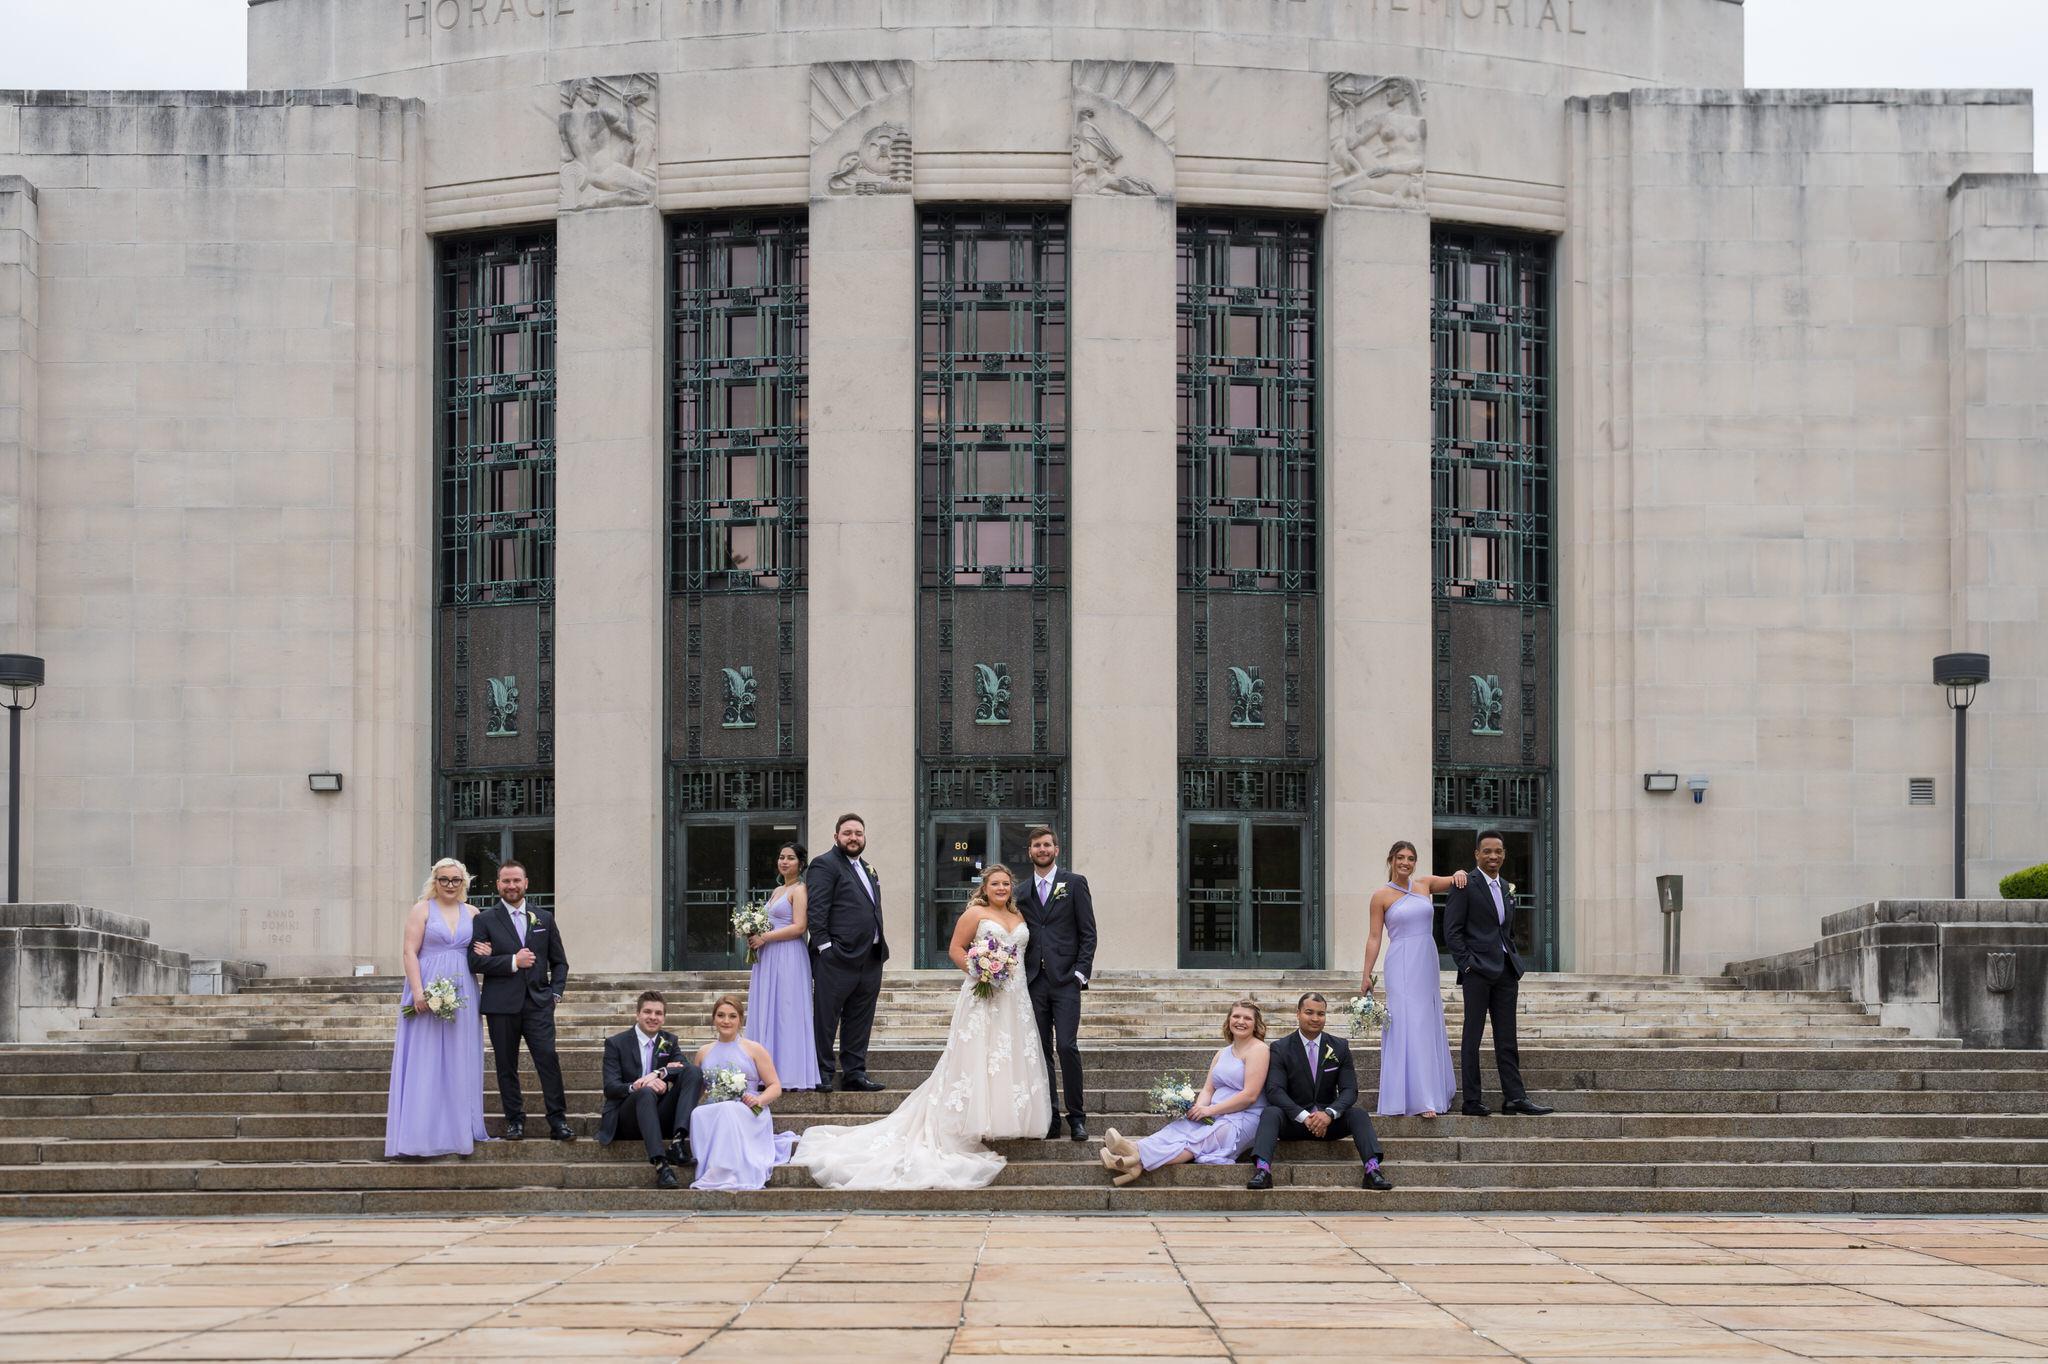 A bridal party pose on the steps of the Horace H. Rackham Educational Memorial on their wedding day.  